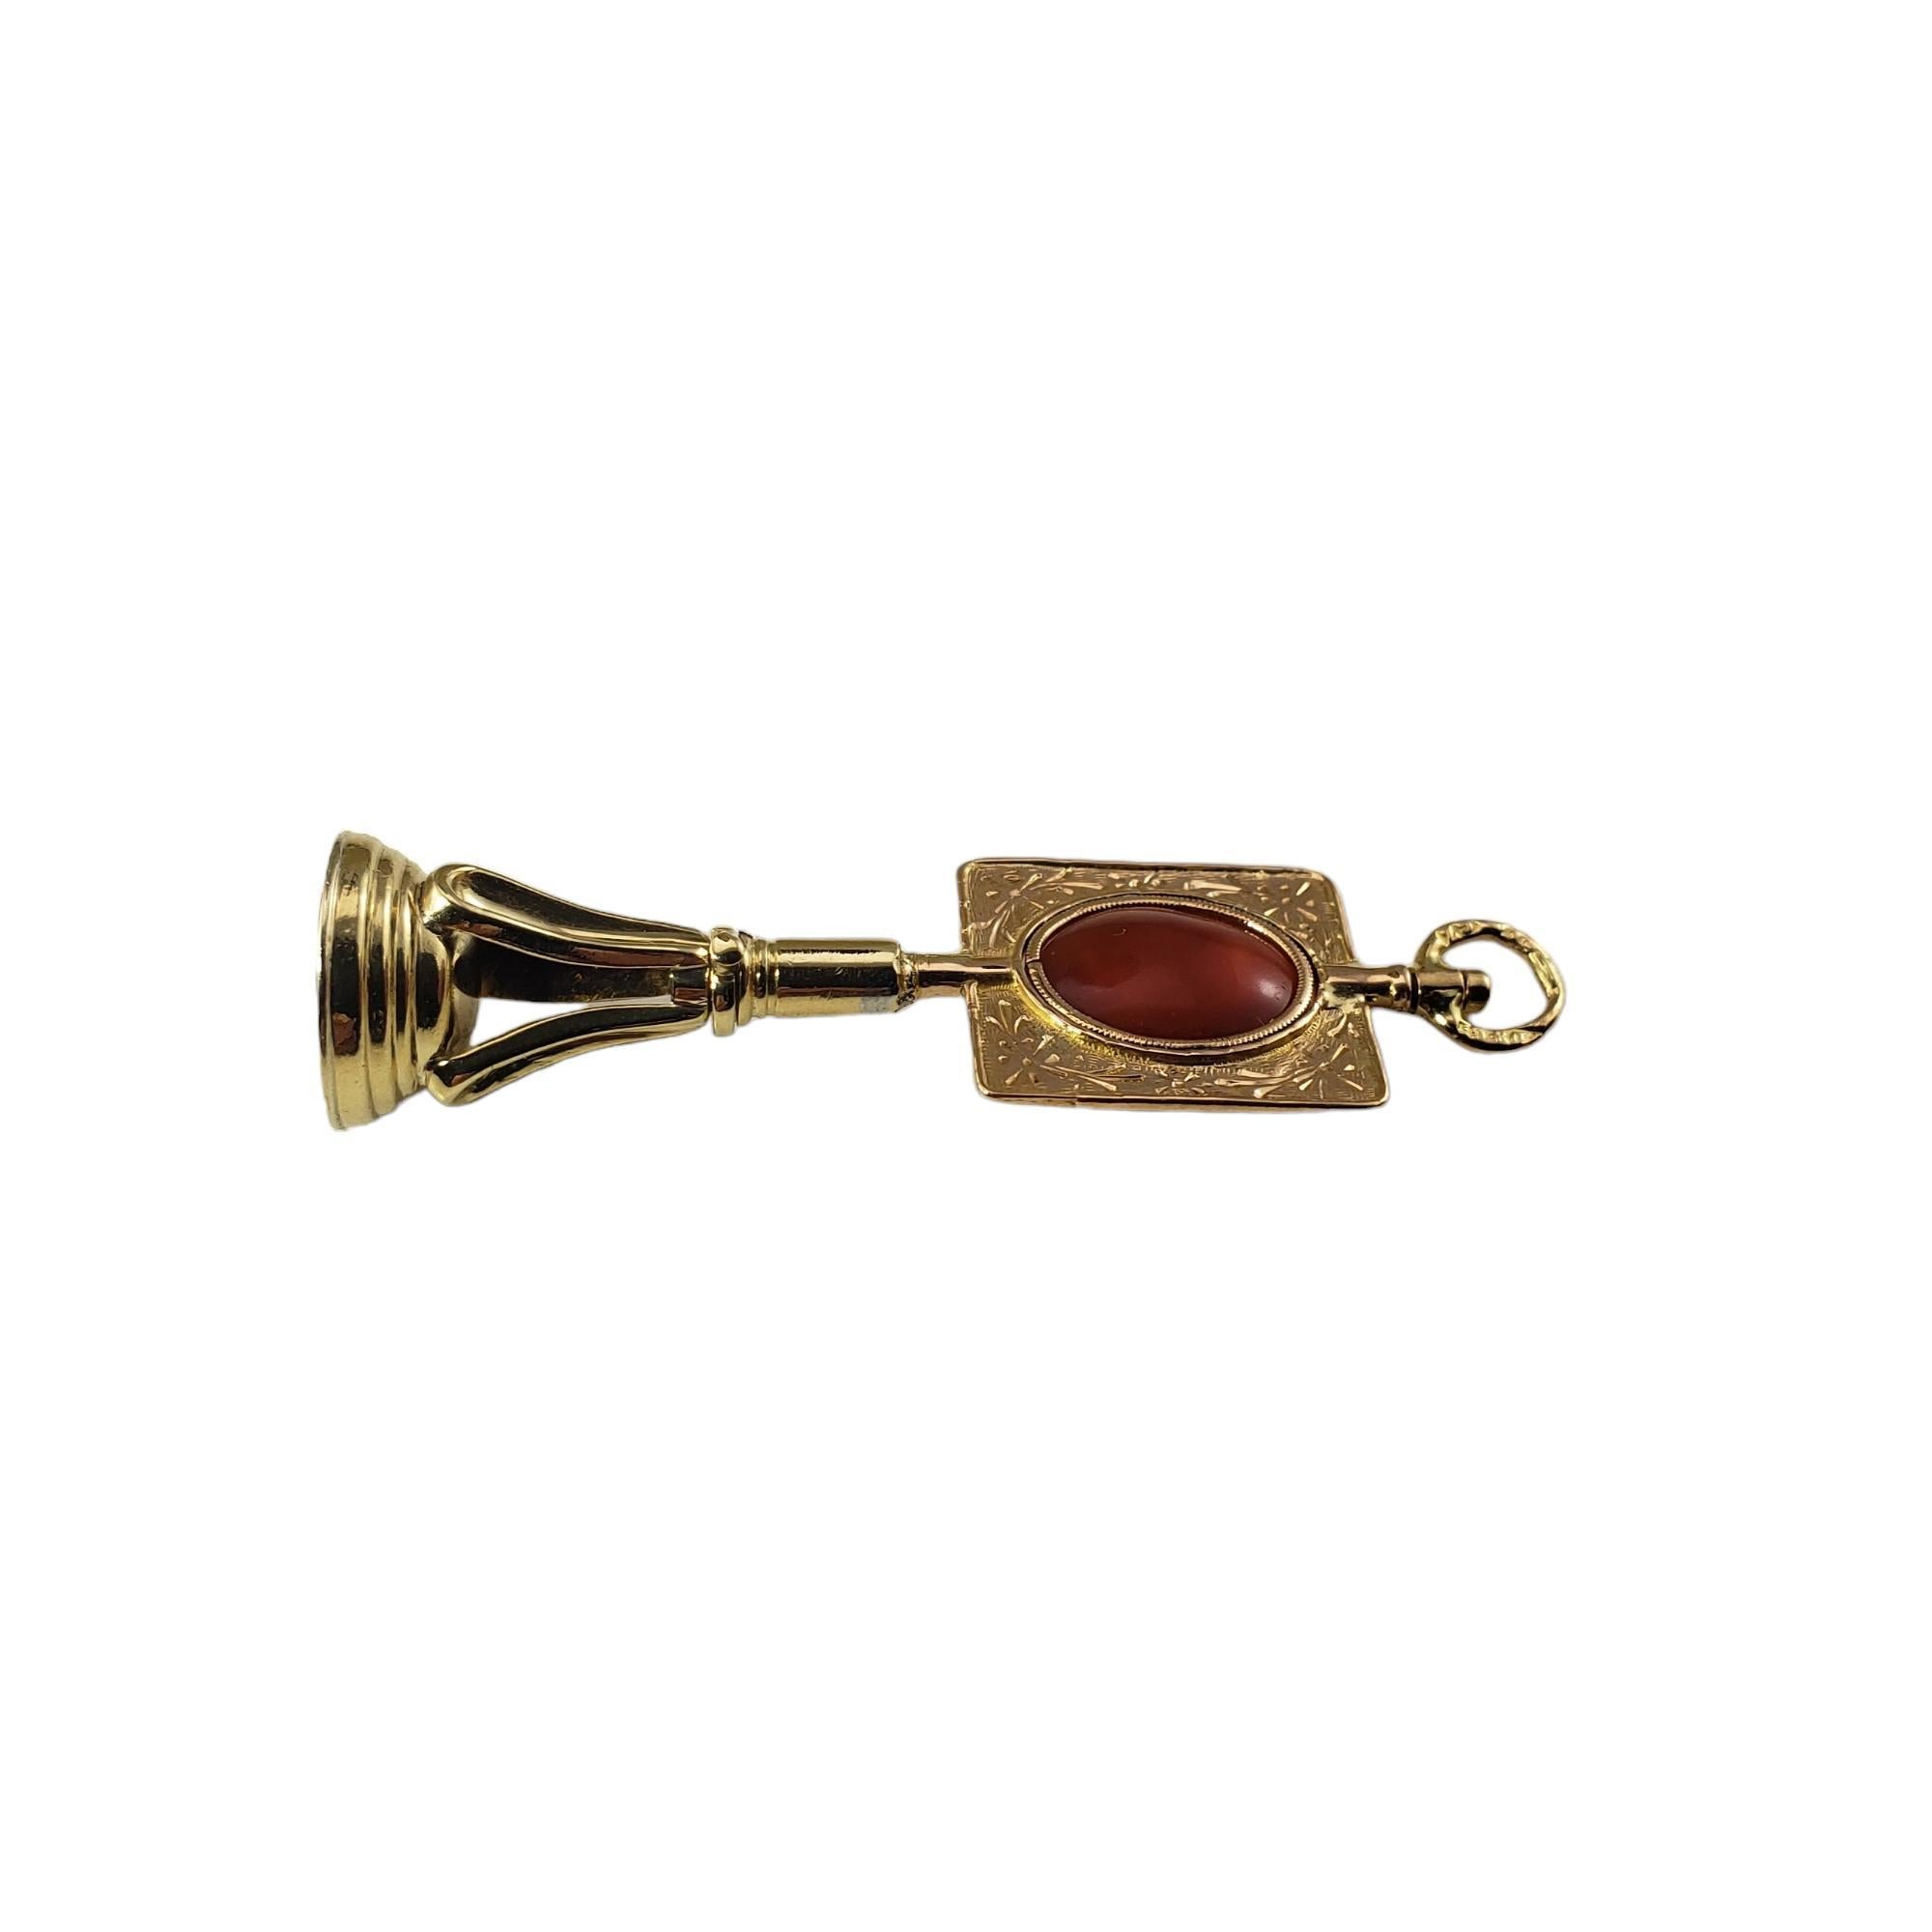  14 Karat Yellow Gold and Carnelian Fob Pendant #15725 In Good Condition For Sale In Washington Depot, CT